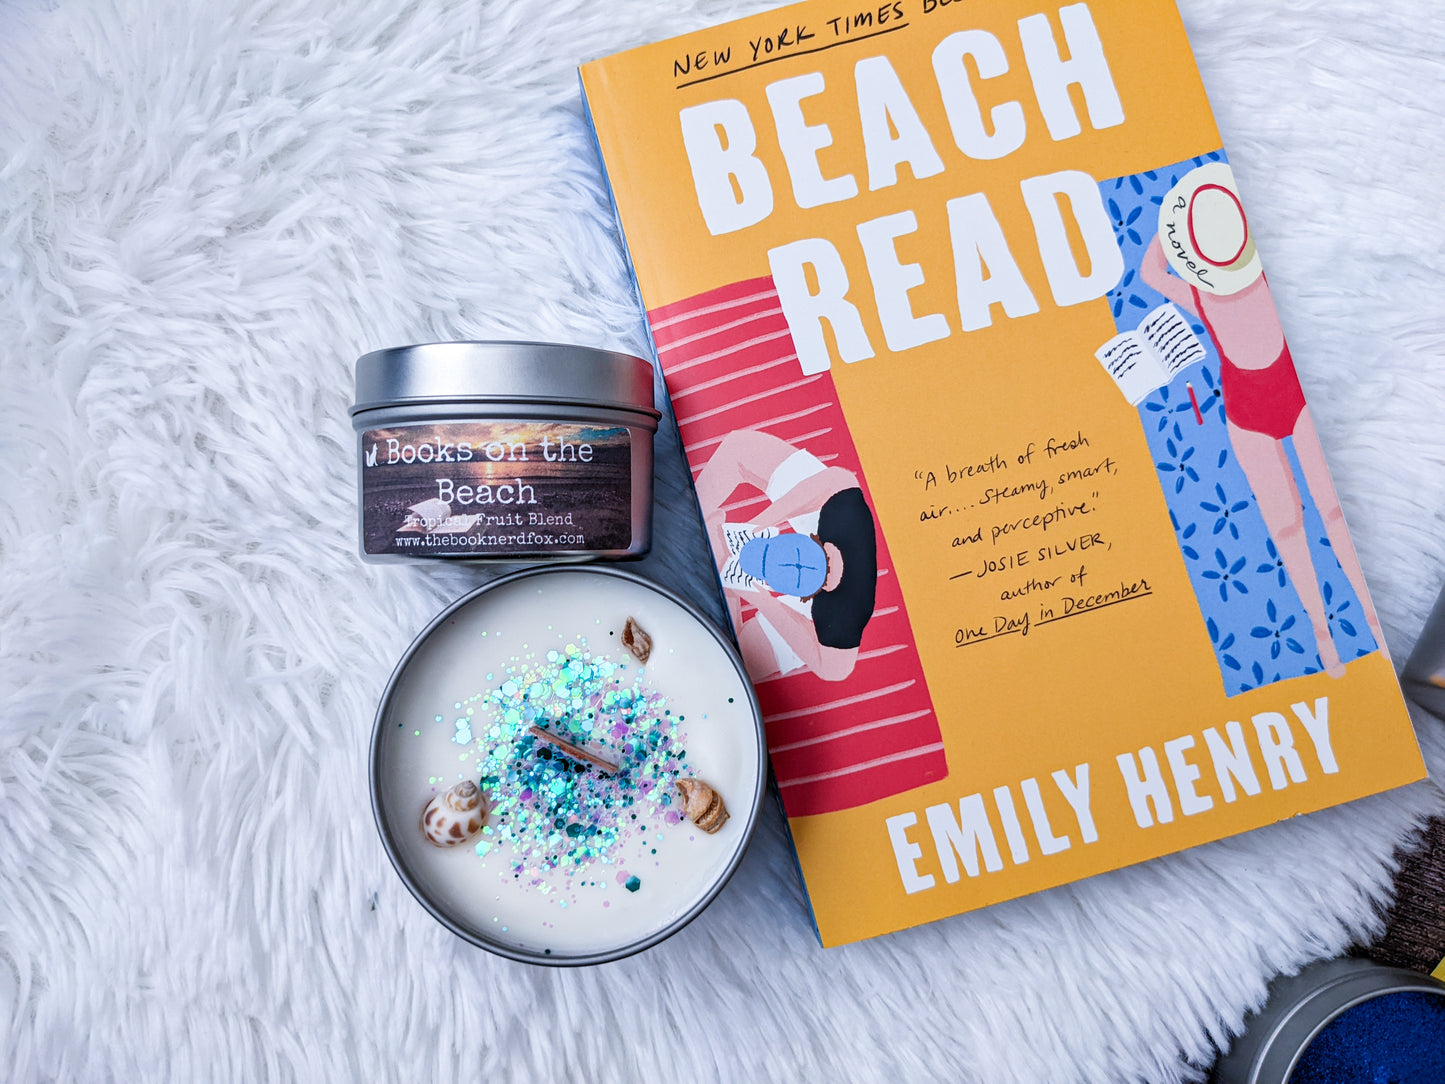 Books on the Beach, Tropical Fruit Blend Scented Candle